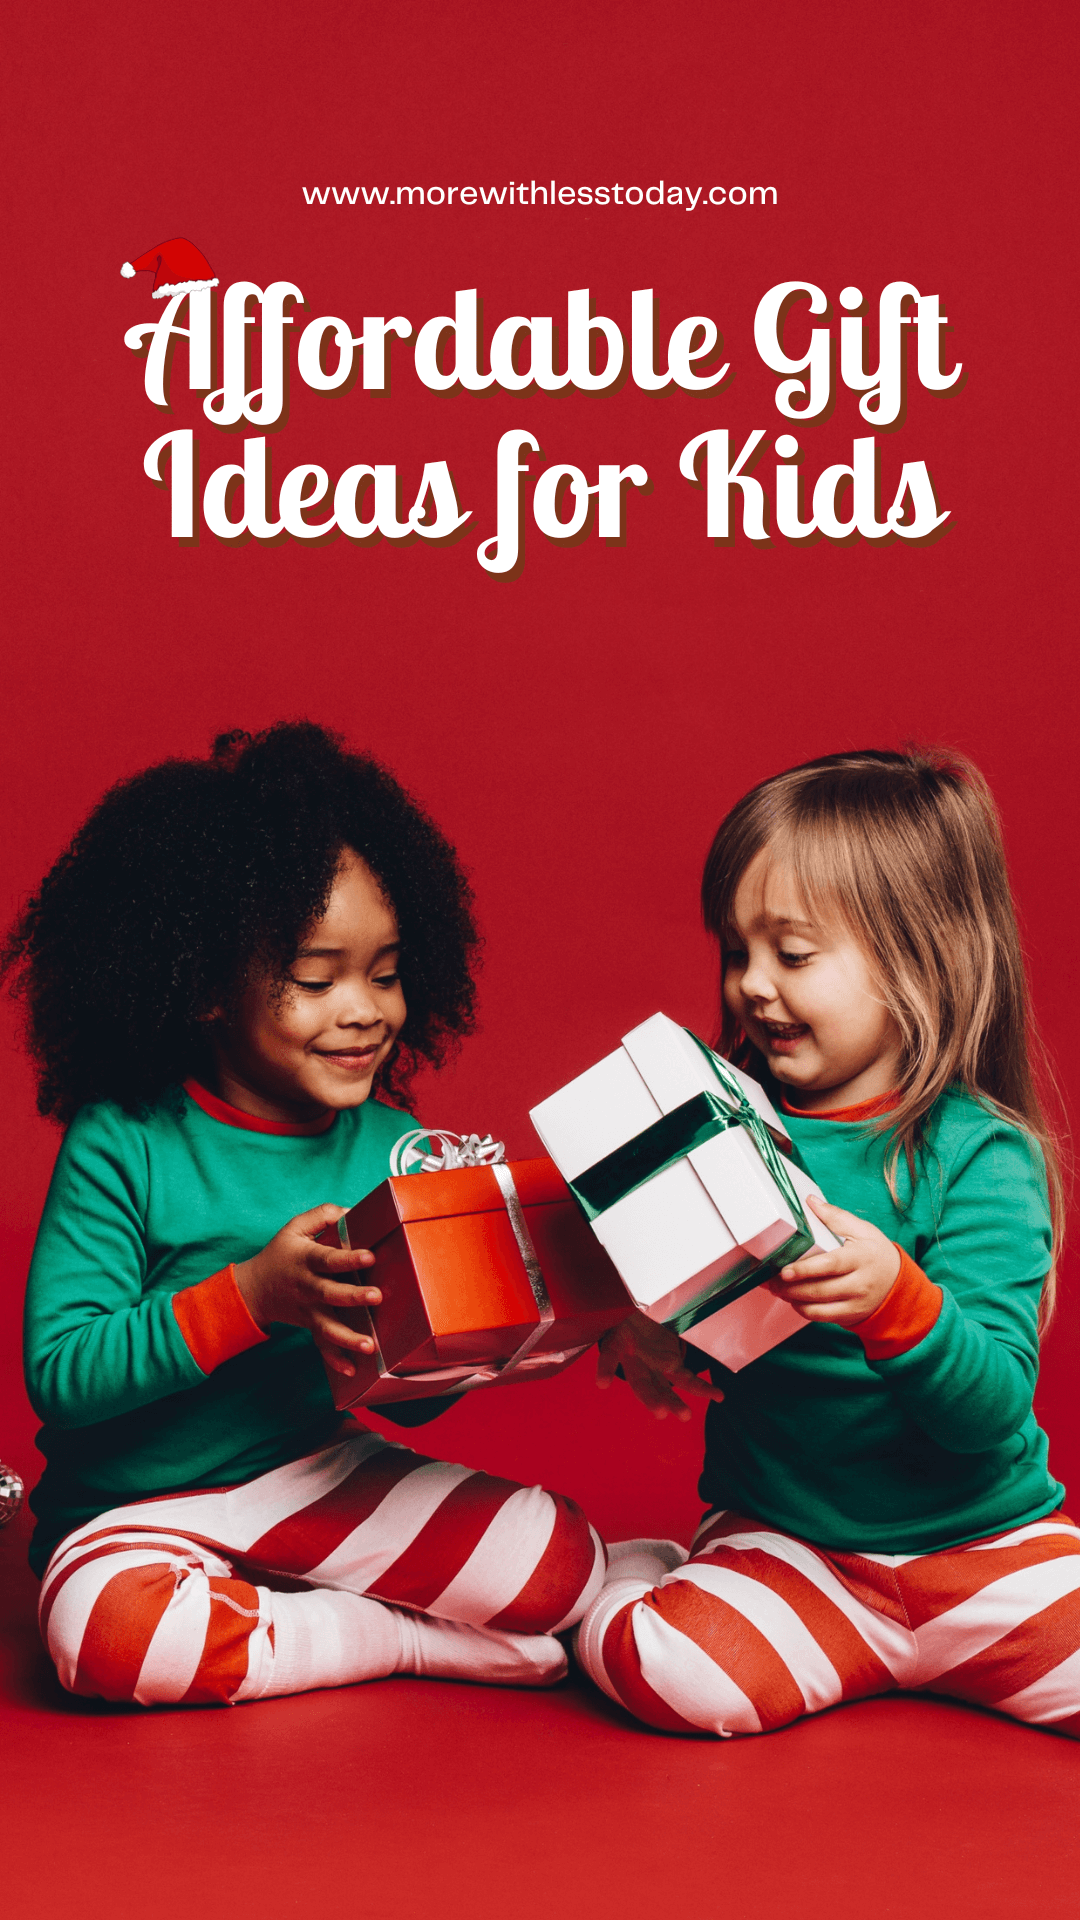 Affordable Gift Ideas for Kids from Amazon - PIN